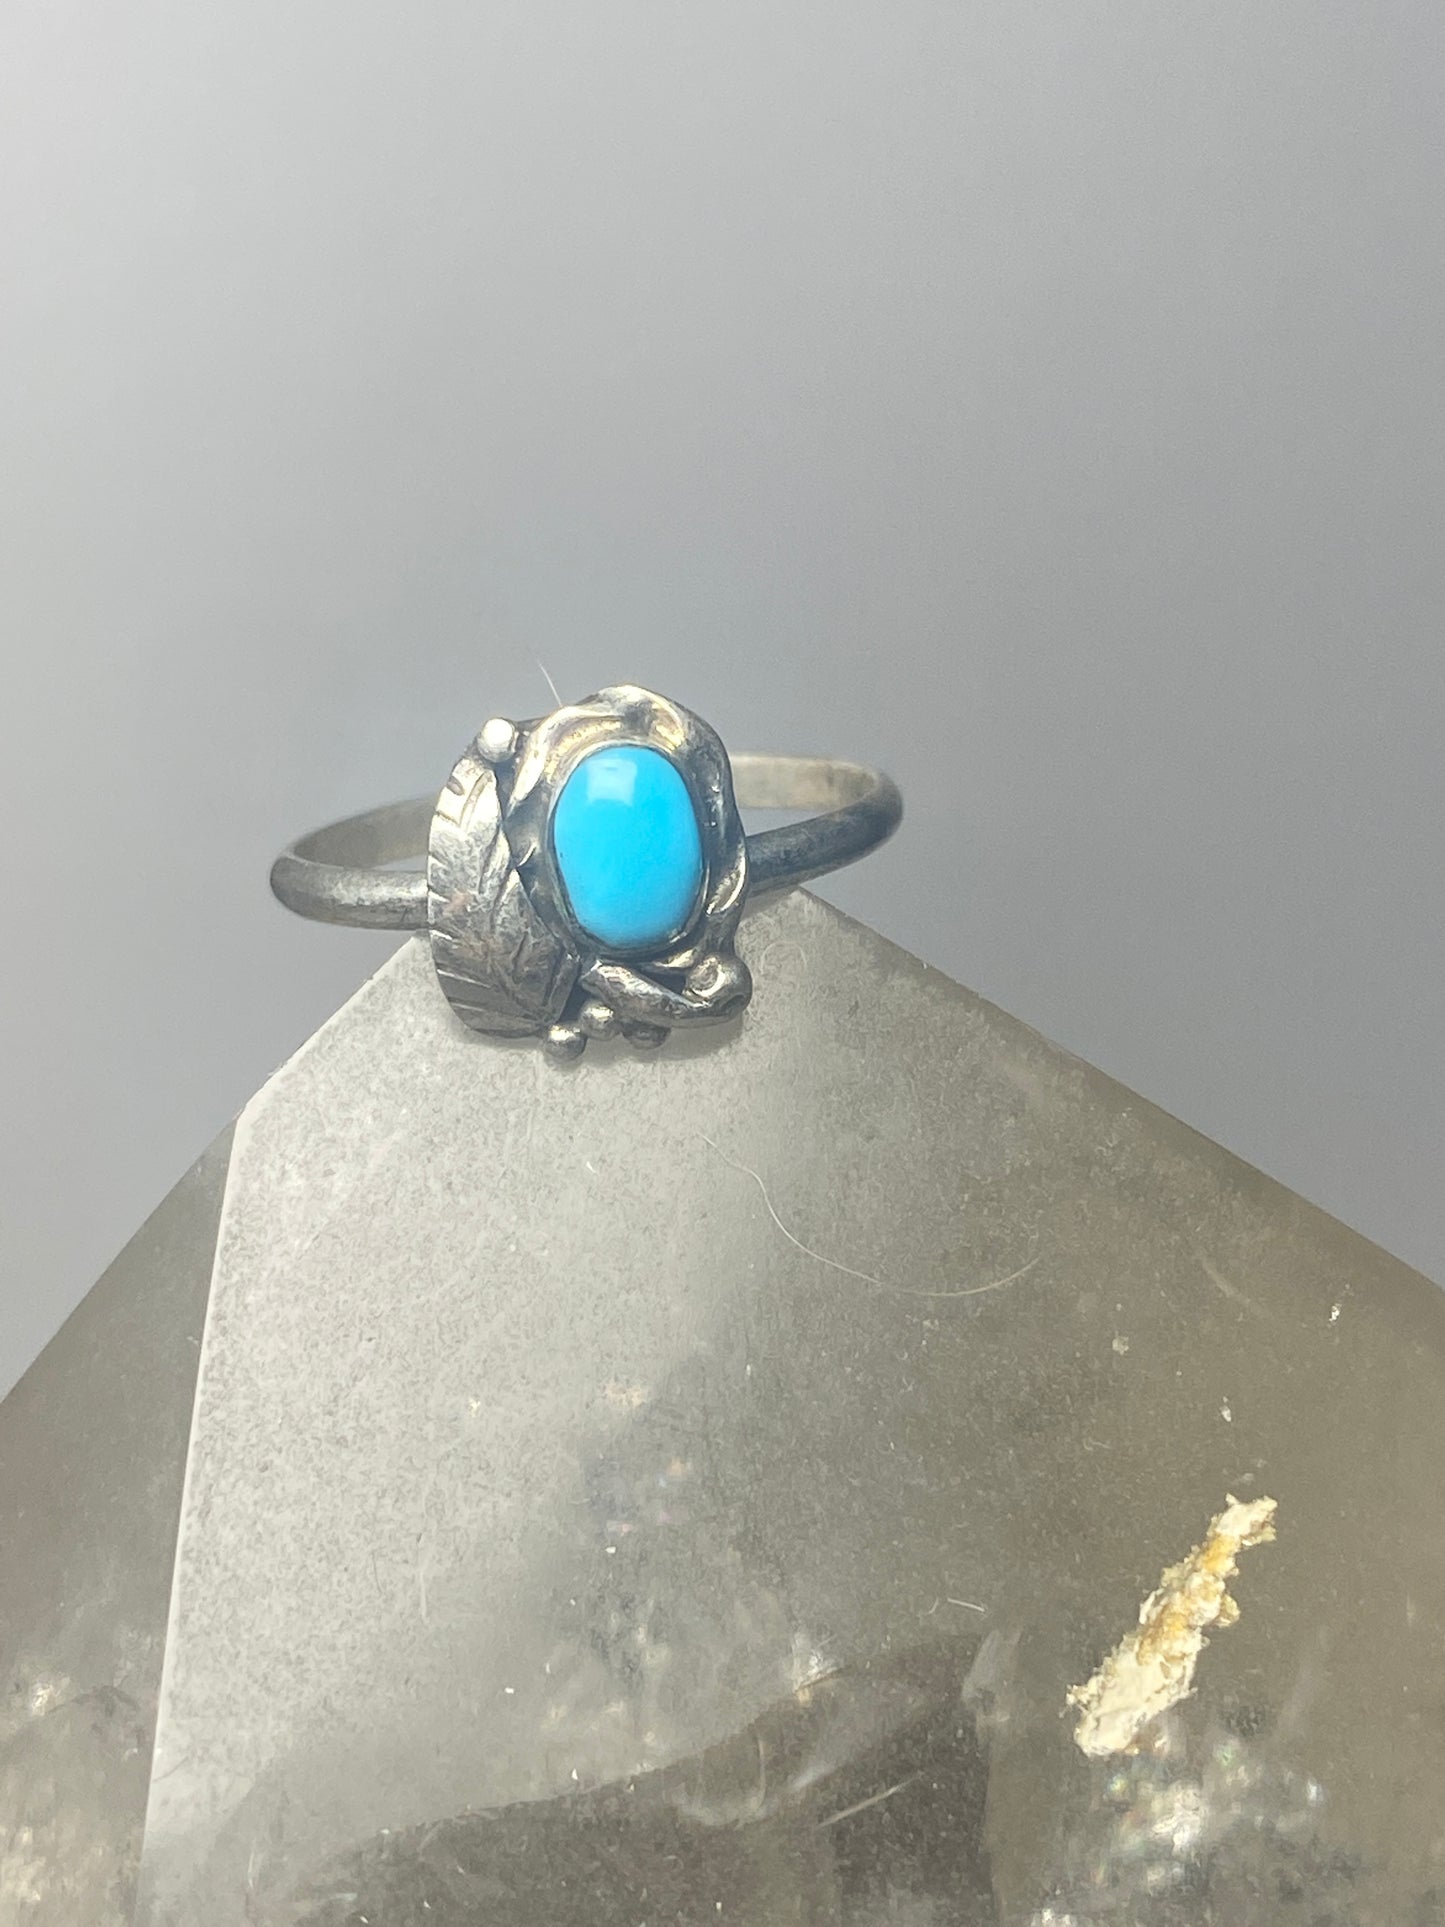 Turquoise ring leaves band southwest sterling silver women girls f